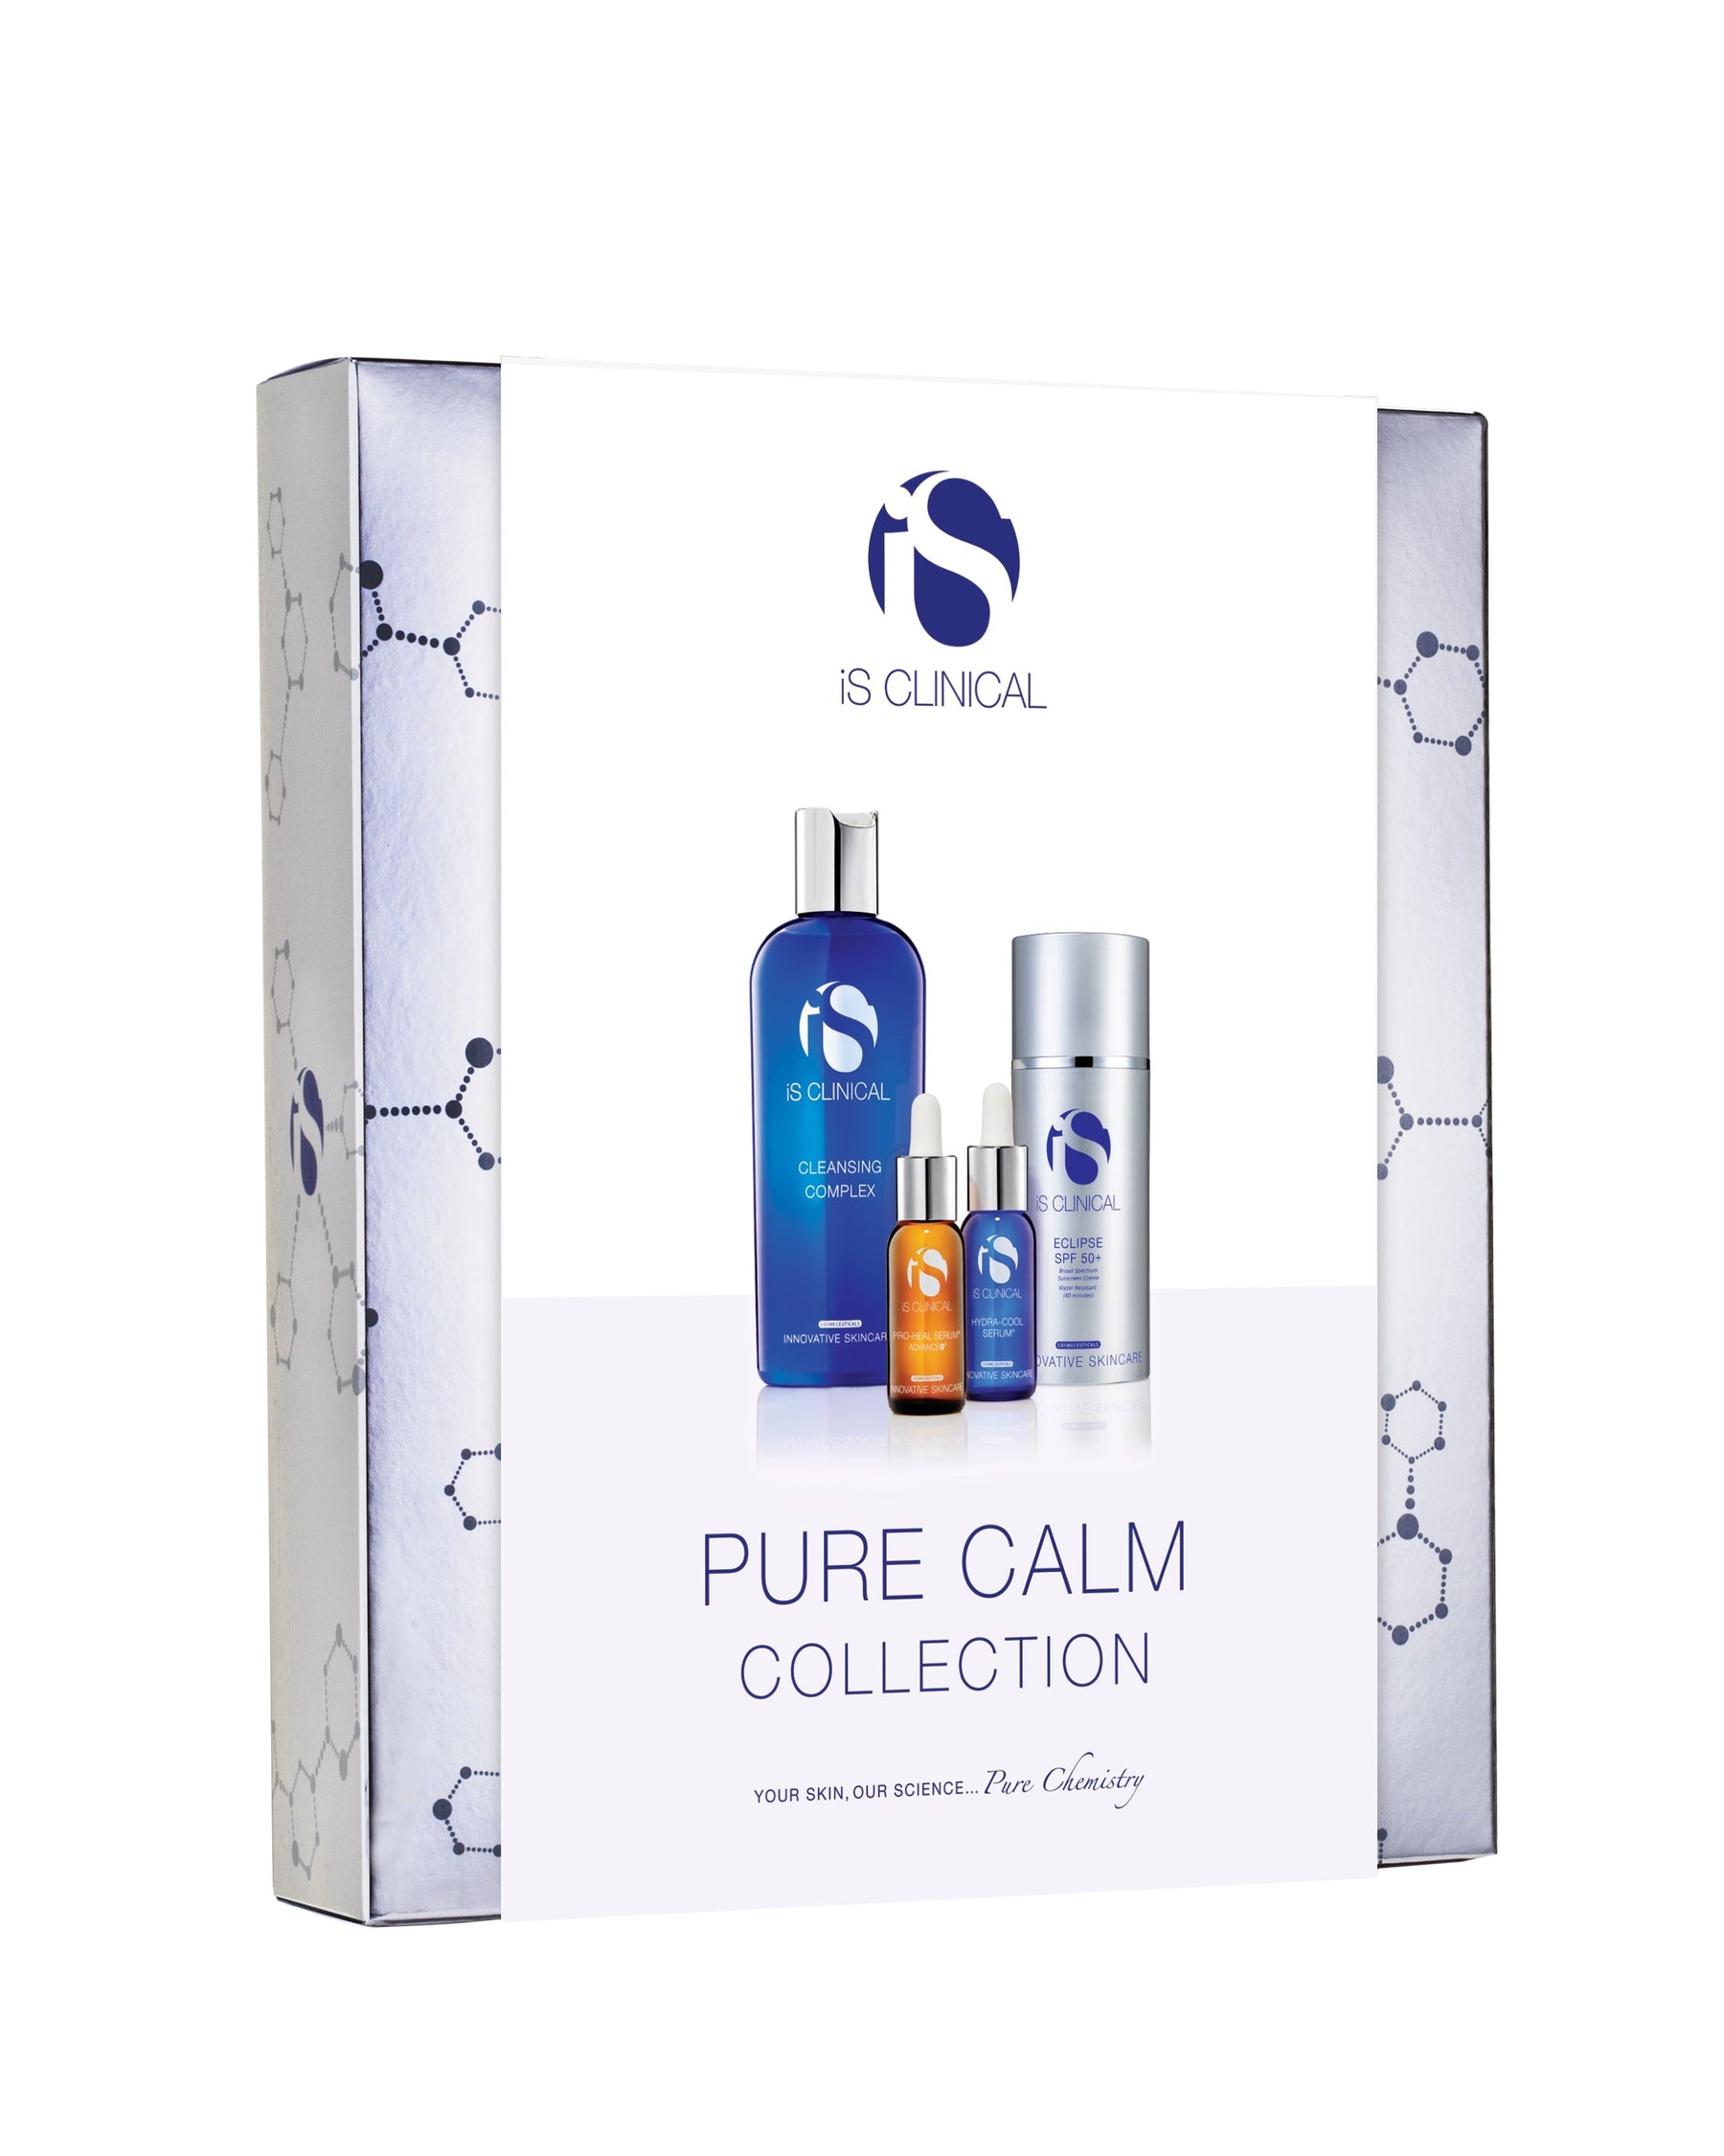 iS Clinical Pure Calm Collection 180ml, 15ml, 15ml, 100g